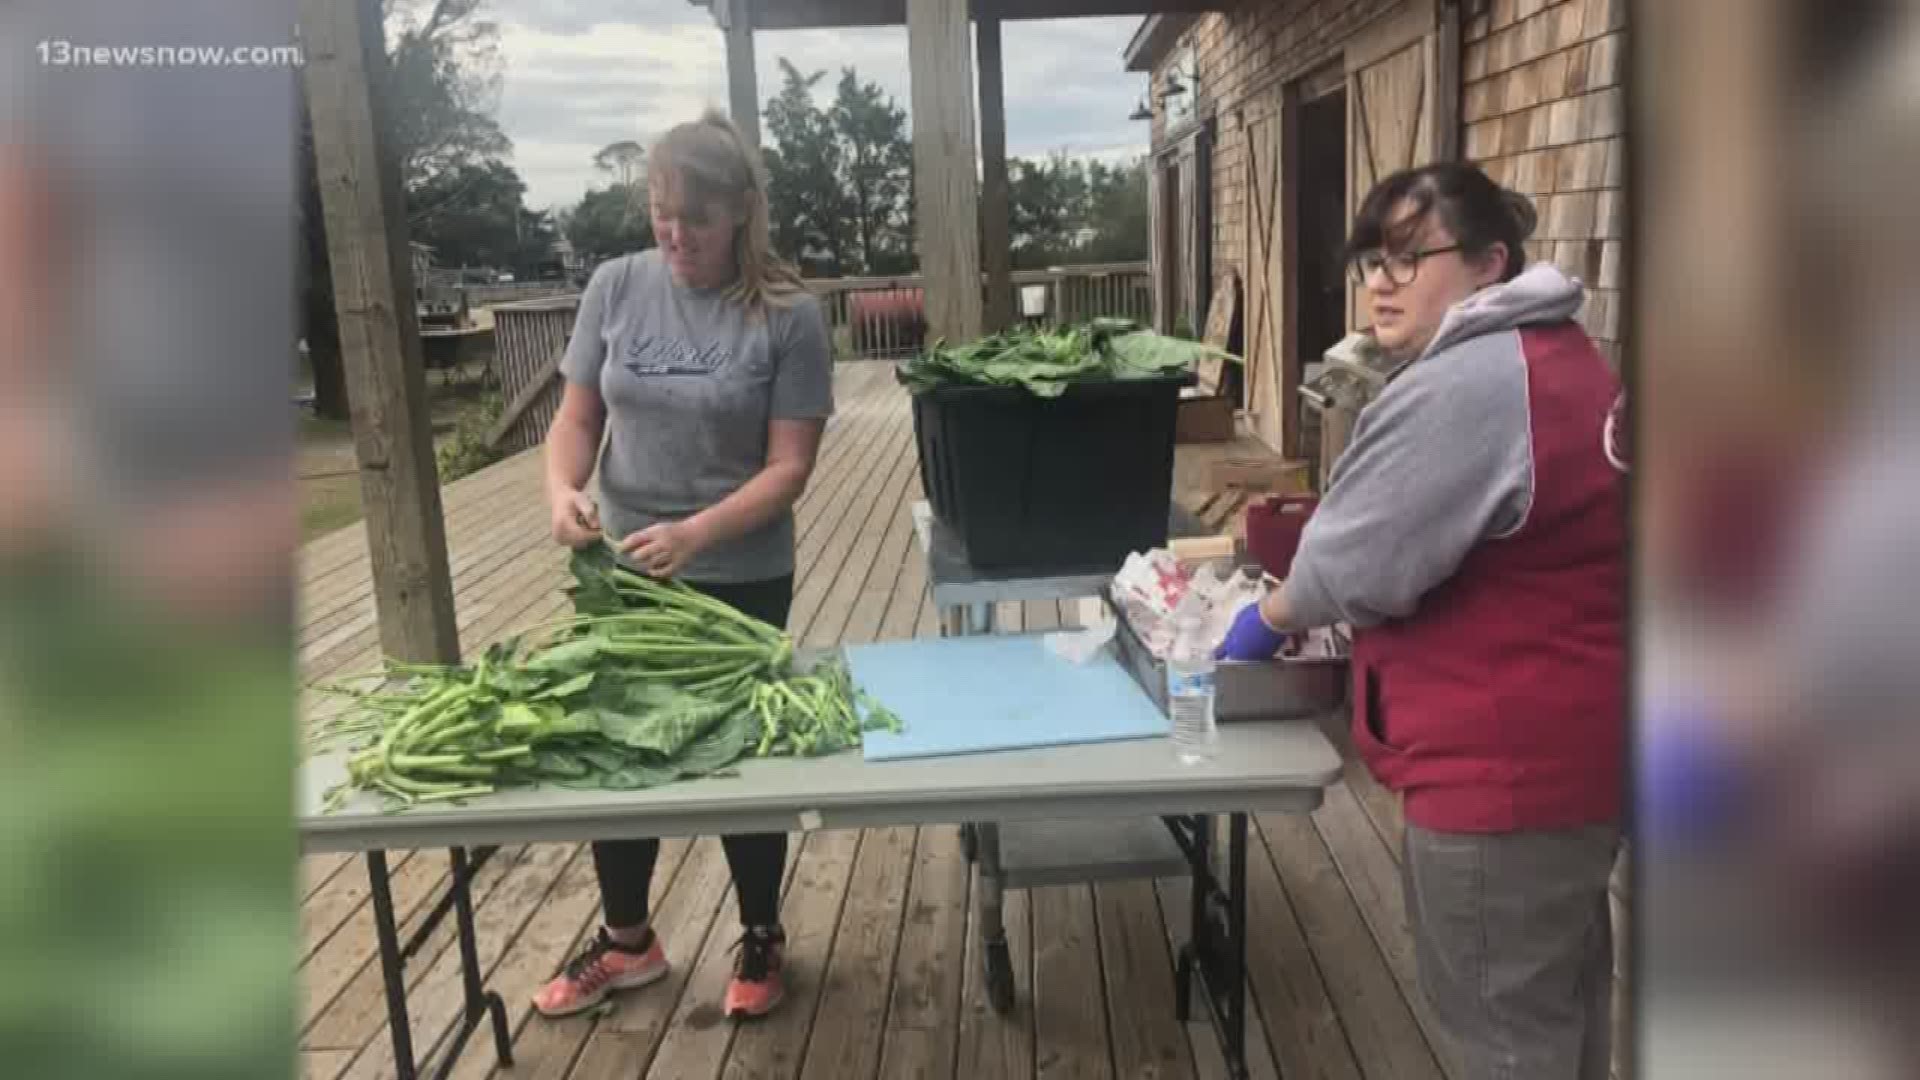 Hurricane Dorian hit the island hard, but neighbors help each other on the island. A group from Kill Devil Hills prepared a Thanksgiving meal for those on Ocracoke.